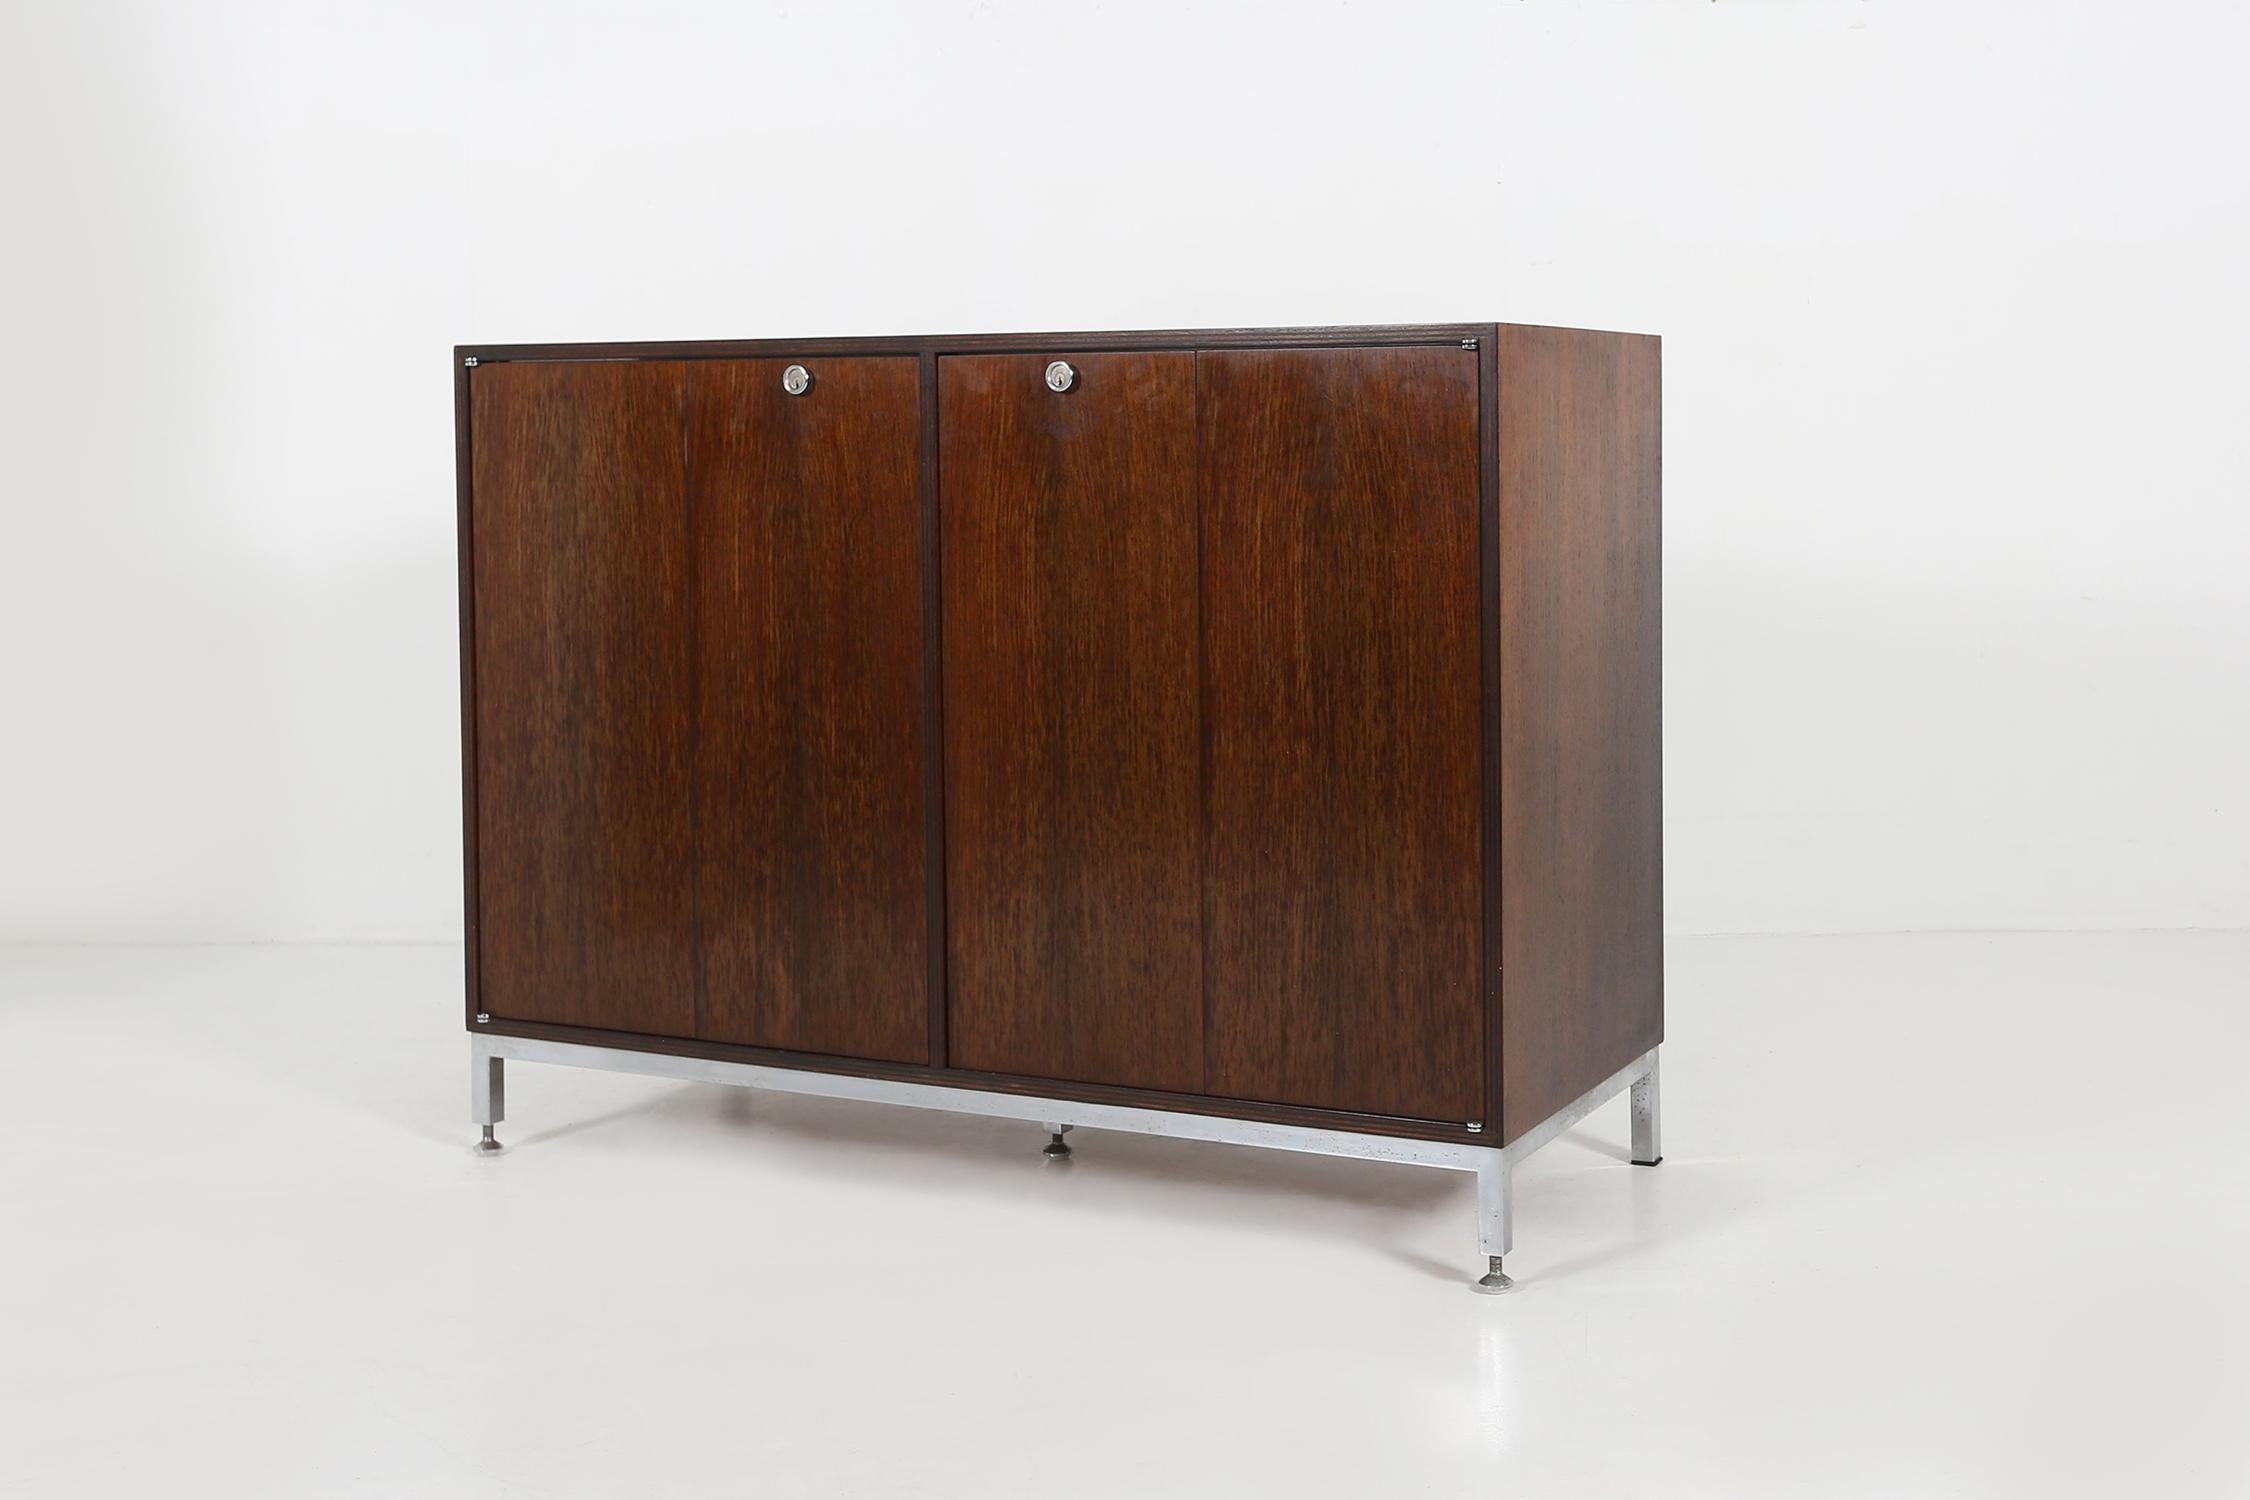 Cabinet by Jules Wabbes (Belgium) Ca.1960.
Made of Rosewood veneer and chrome metal base.
Some nice details are the butterfly doors.